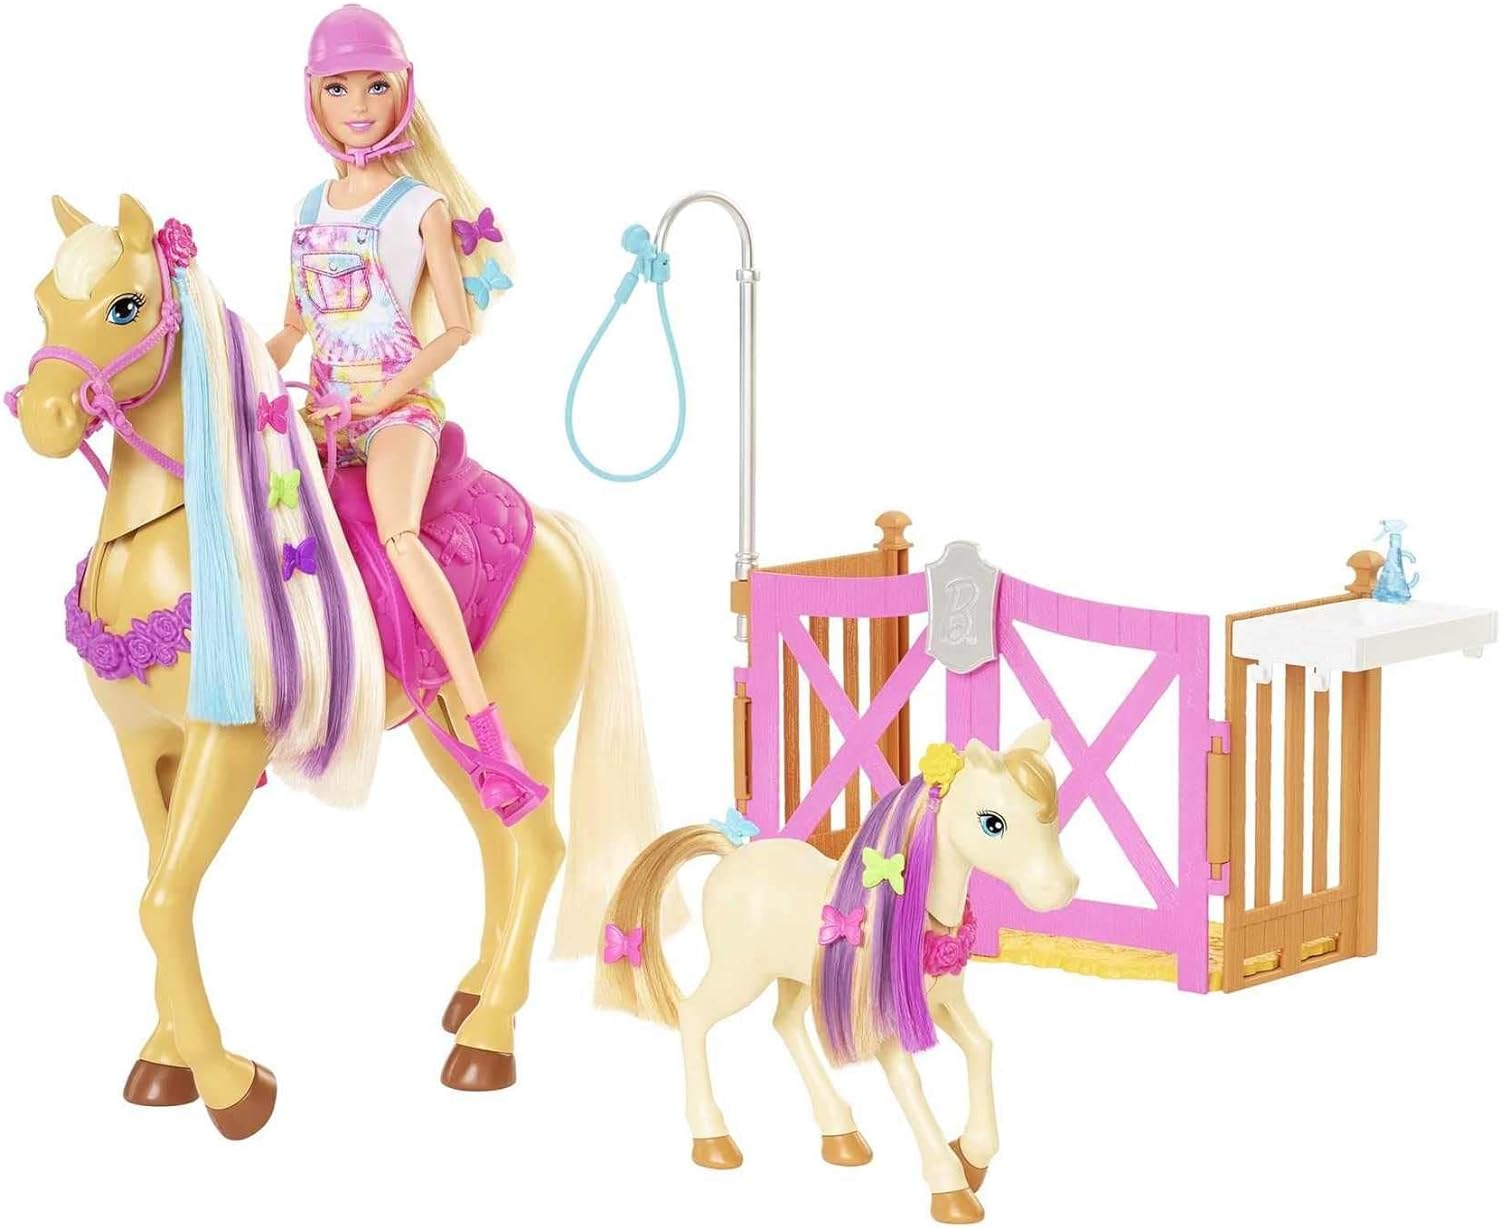 Barbie Groom 'n Care Horses Playset with Barbie Doll (Blonde 11.5-Inch), 2 Horses, 20+ Grooming and Hairstyling Accessories, Gift for 3-7 Years, GXV77